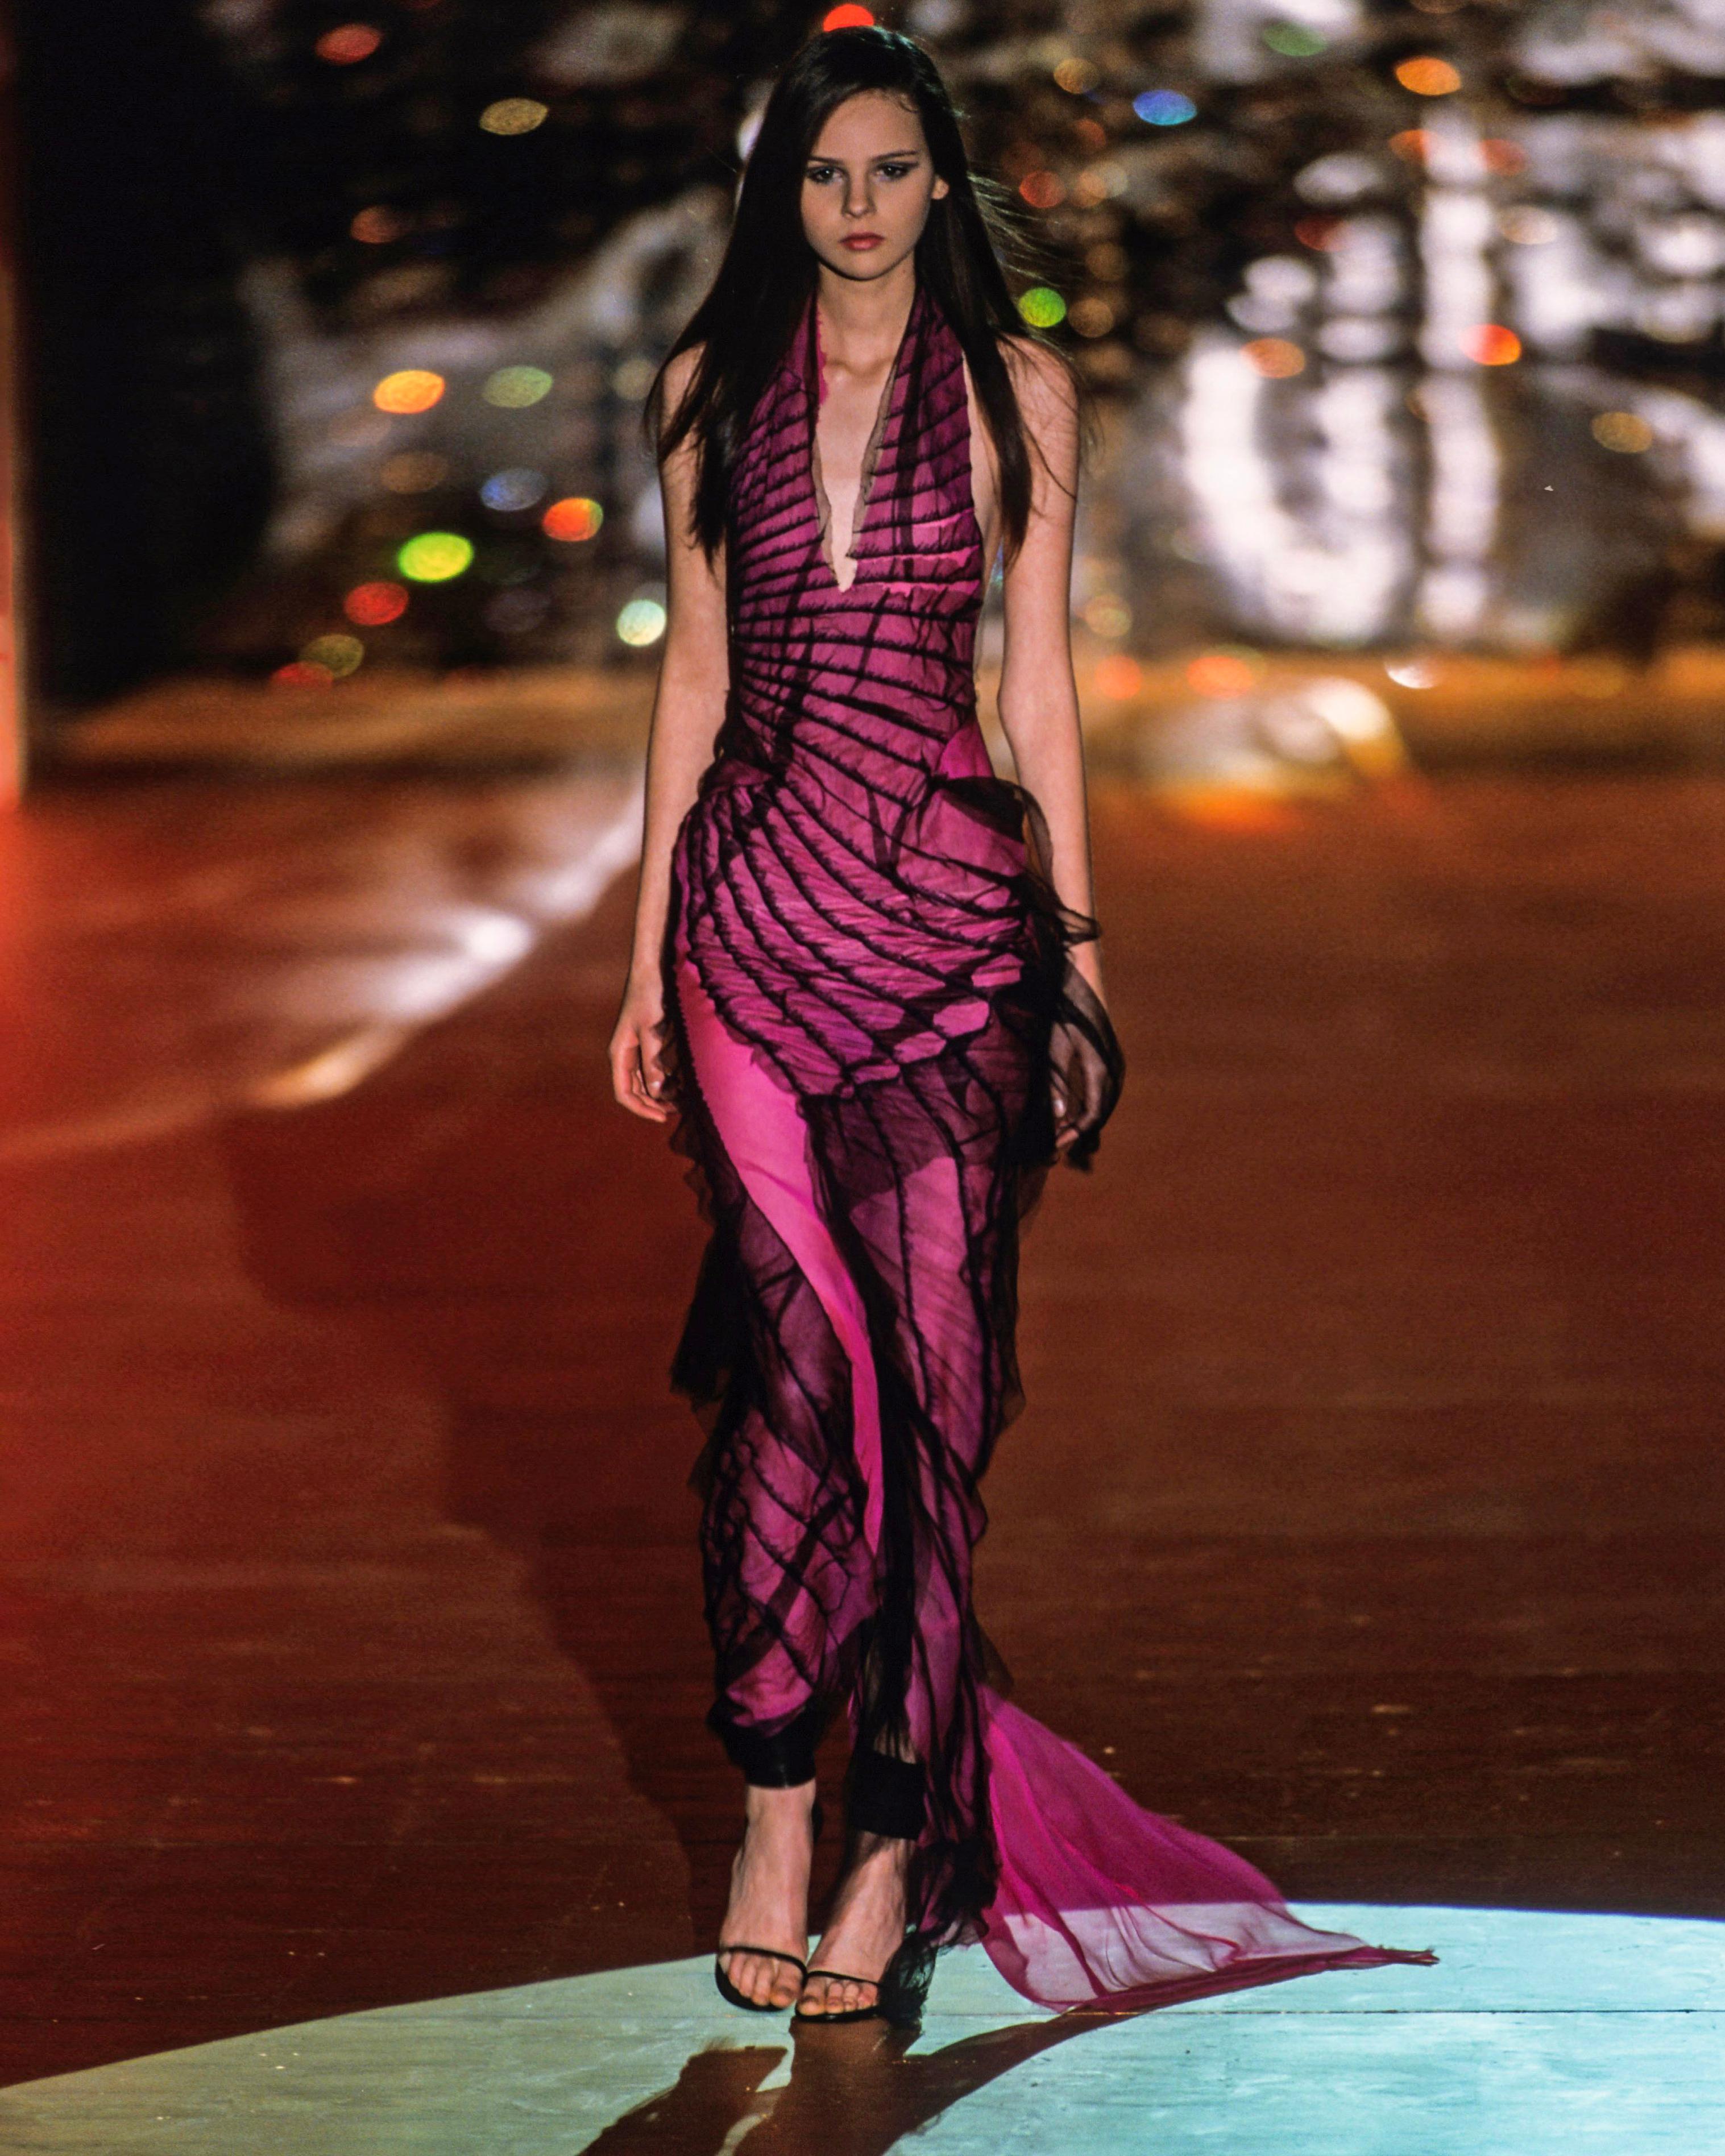 Roberto Cavalli Distressed Pink Silk Mesh Evening Halter Neck Dress, ss 2001 In Good Condition For Sale In London, GB